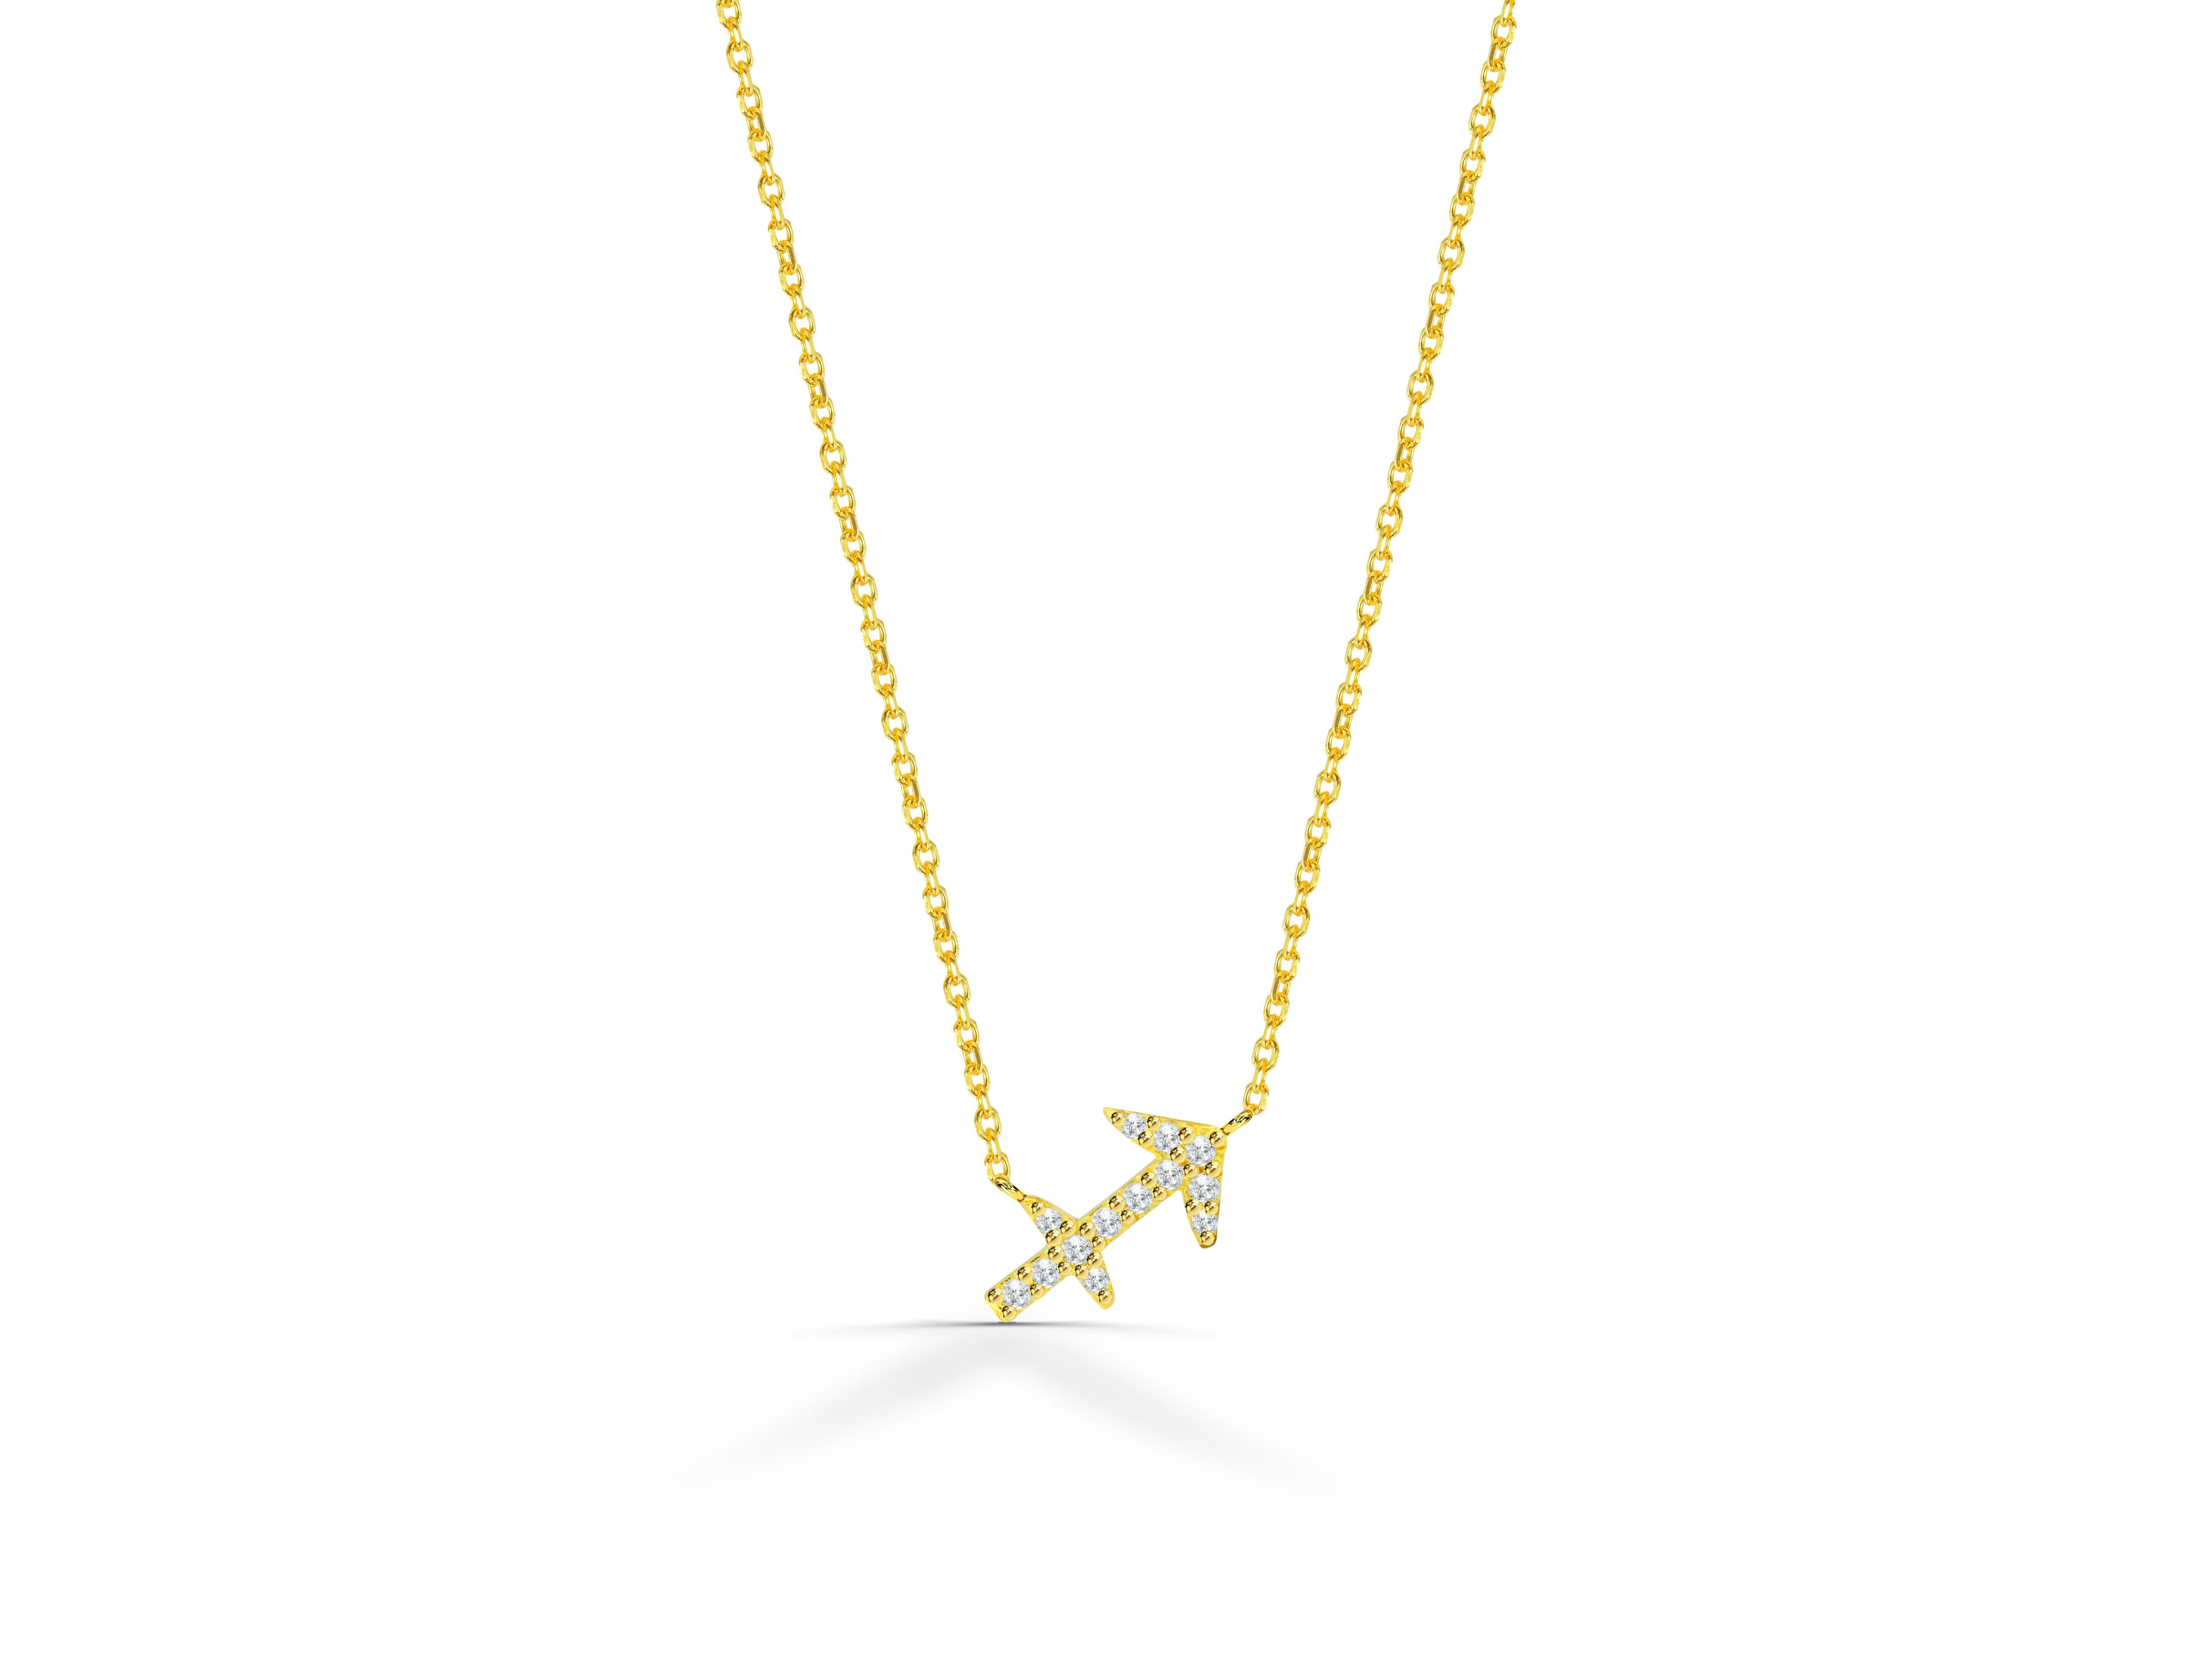 Diamond Necklace Sagittarius Zodiac Sign Gold Zodiac Birth Sign Necklace Gift for Sagittarius, Zodiac Jewelry Star Sign Diamond Pendant

Beautiful and Sparkly Diamond Sagittarius Necklace in 14k gold. Perfect for gifting your loved ones. This piece